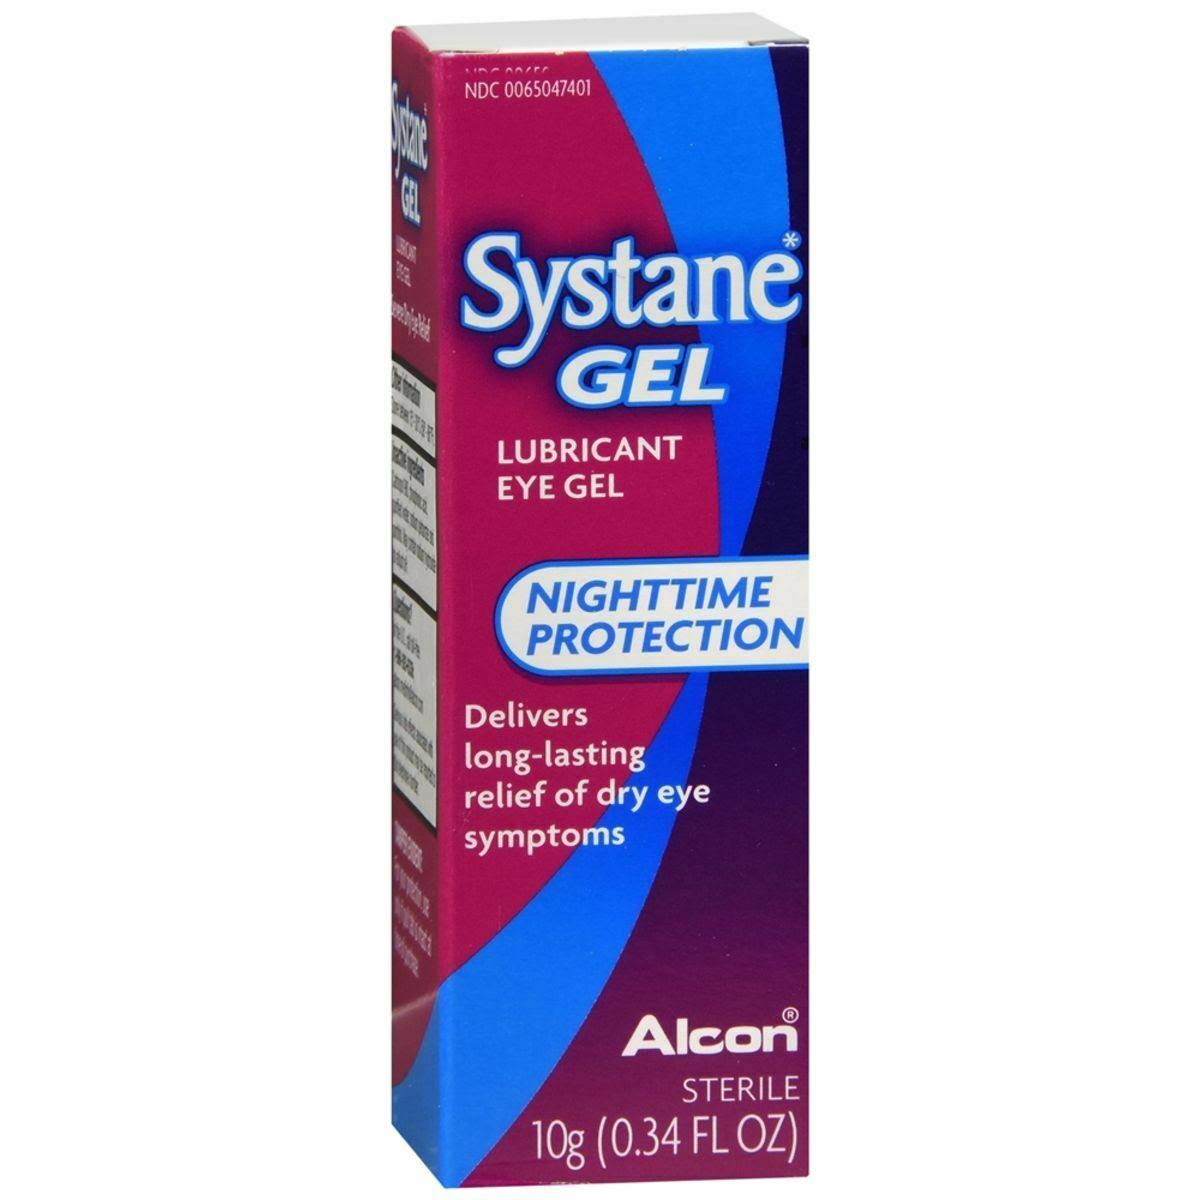 Systane Lubricant Eye Gel - Overnight Therapy, 10ml